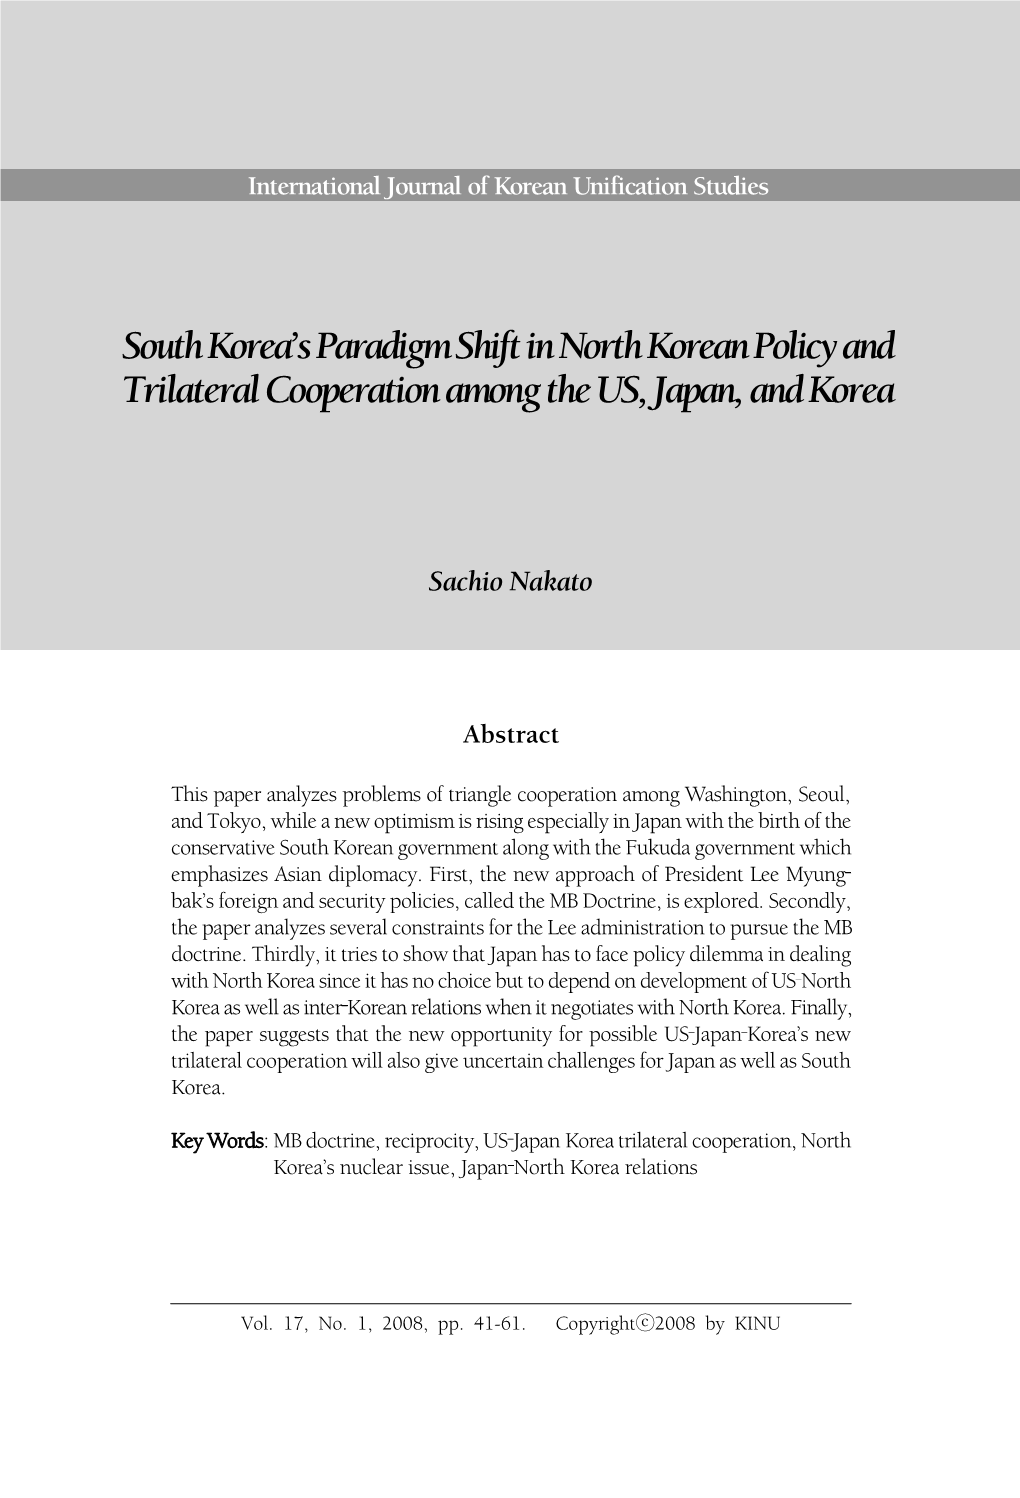 South Korea's Paradigm Shift in North Korean Policy and Trilateral